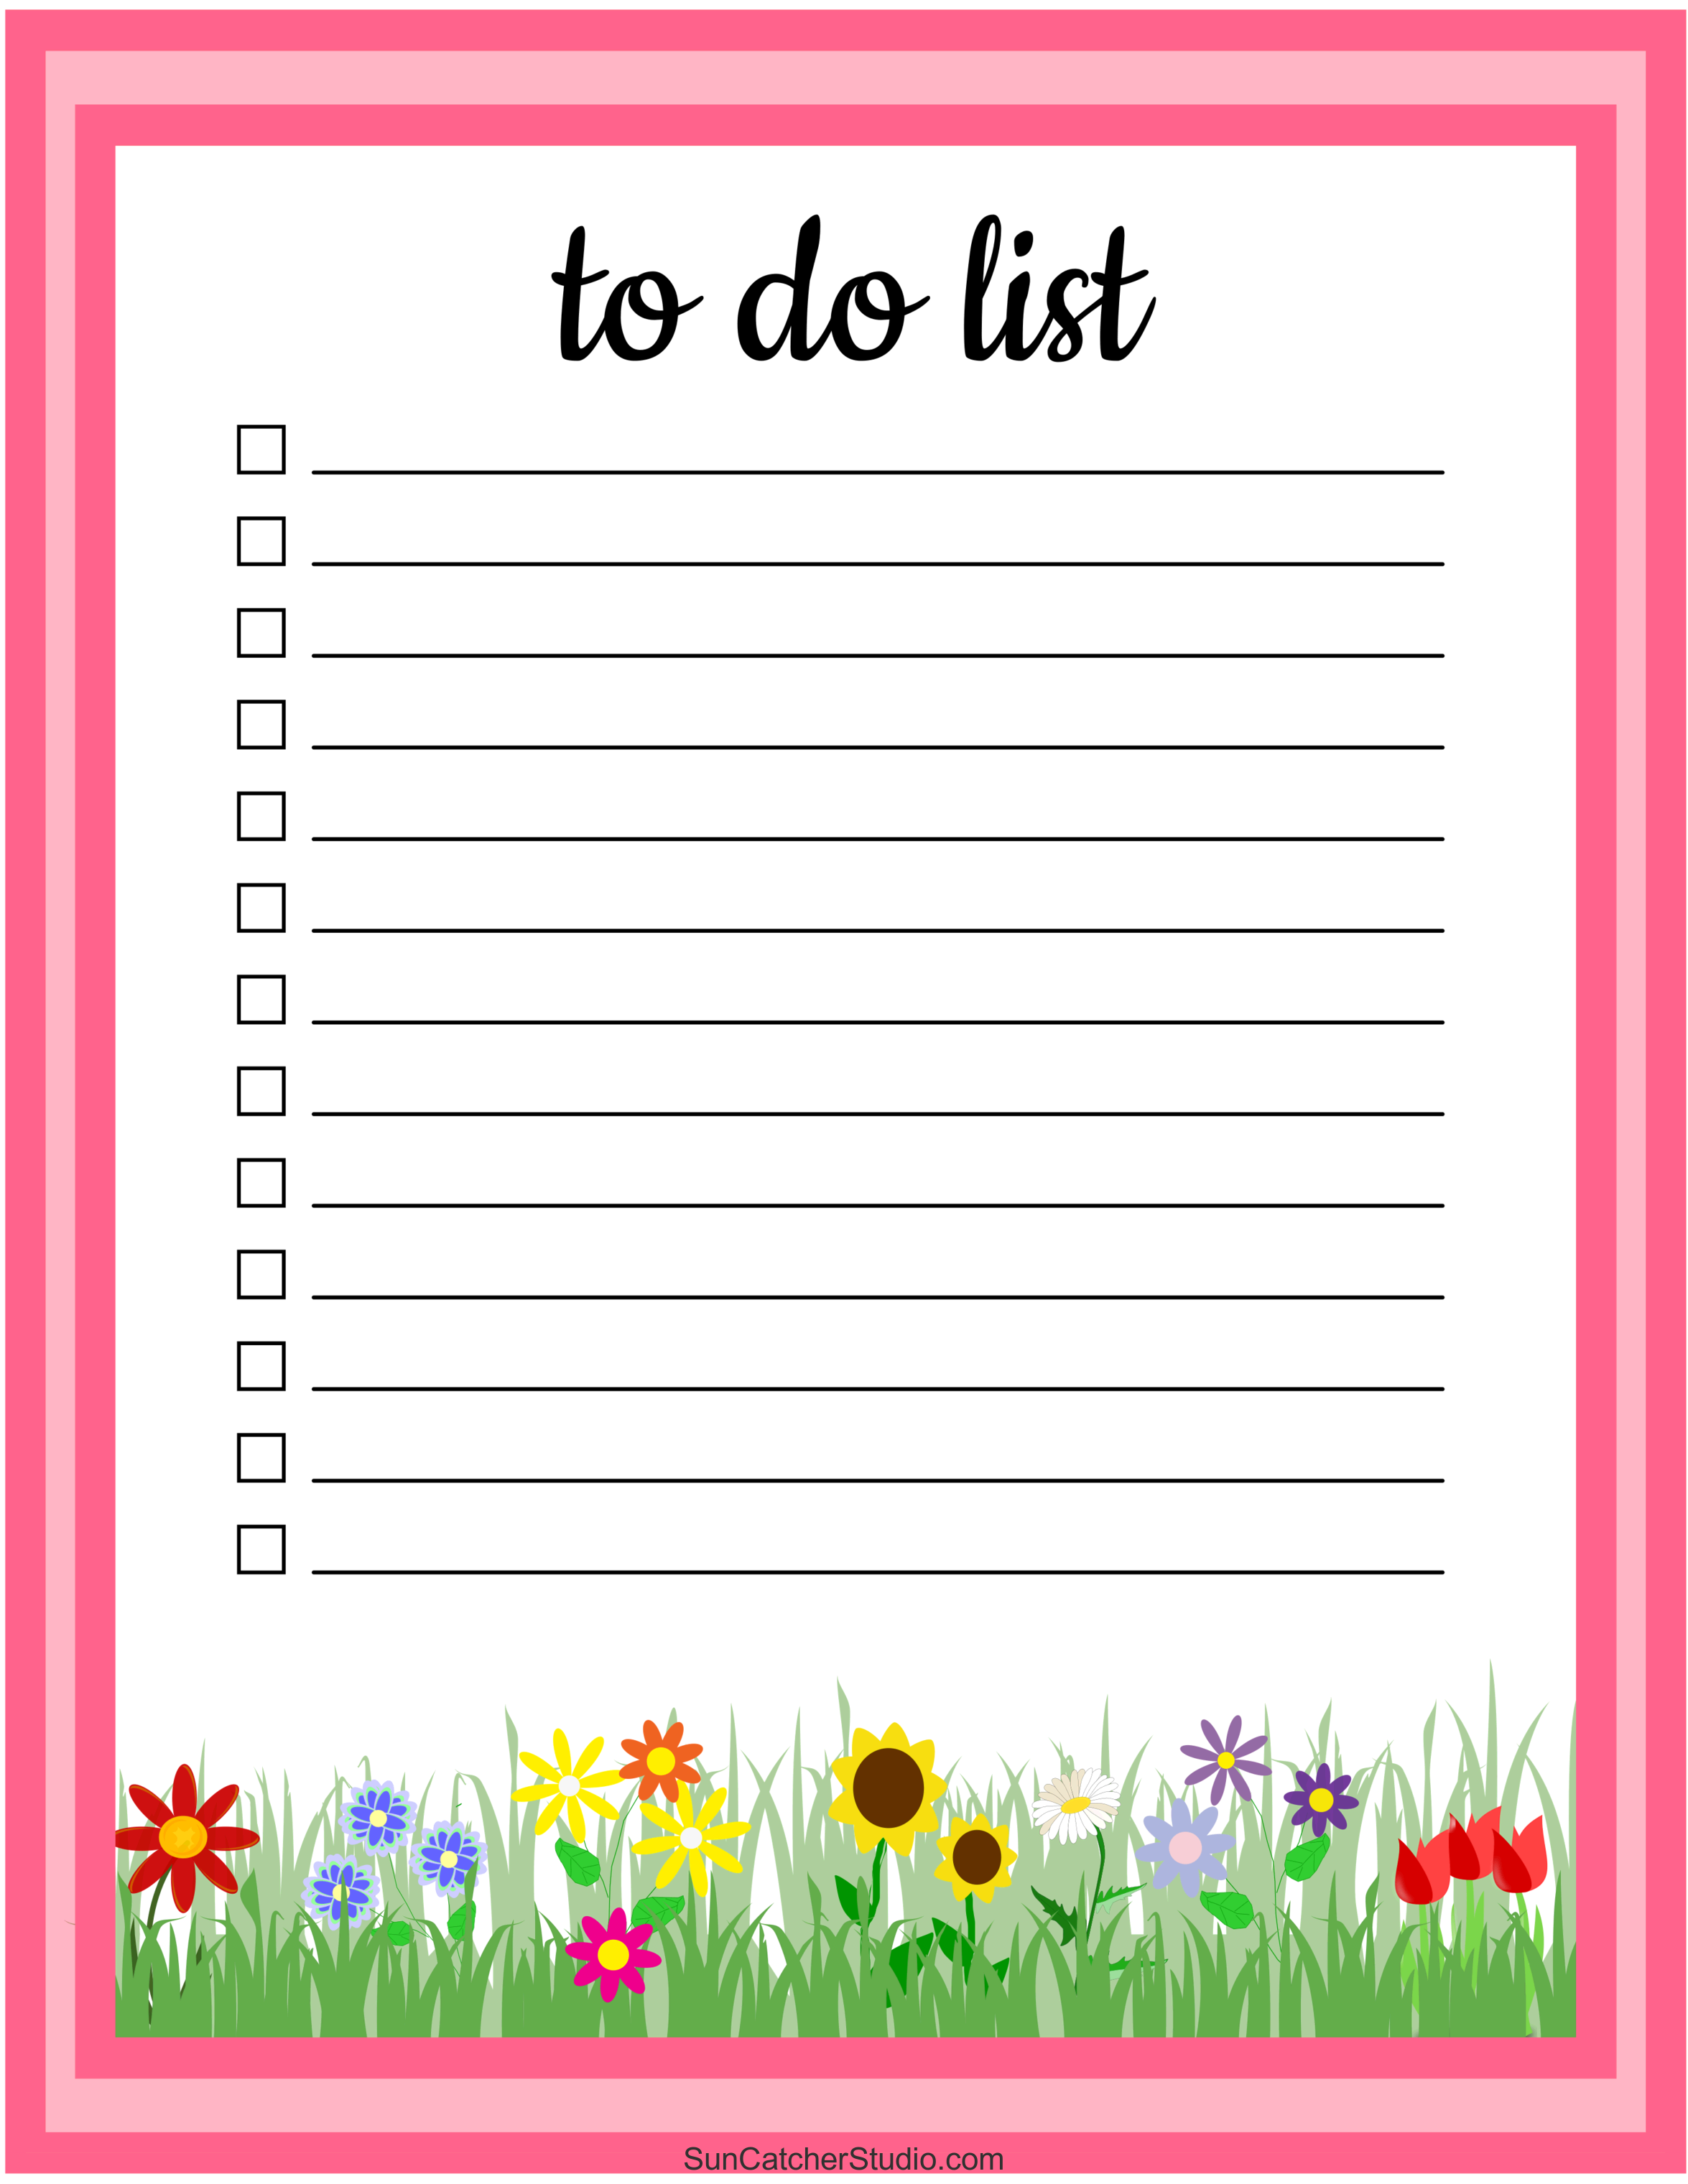 To Do List Plantilla To Do List (Free Printable PDF Templates) – Things To Do – DIY Projects,  Patterns, Monograms, Designs, Templates